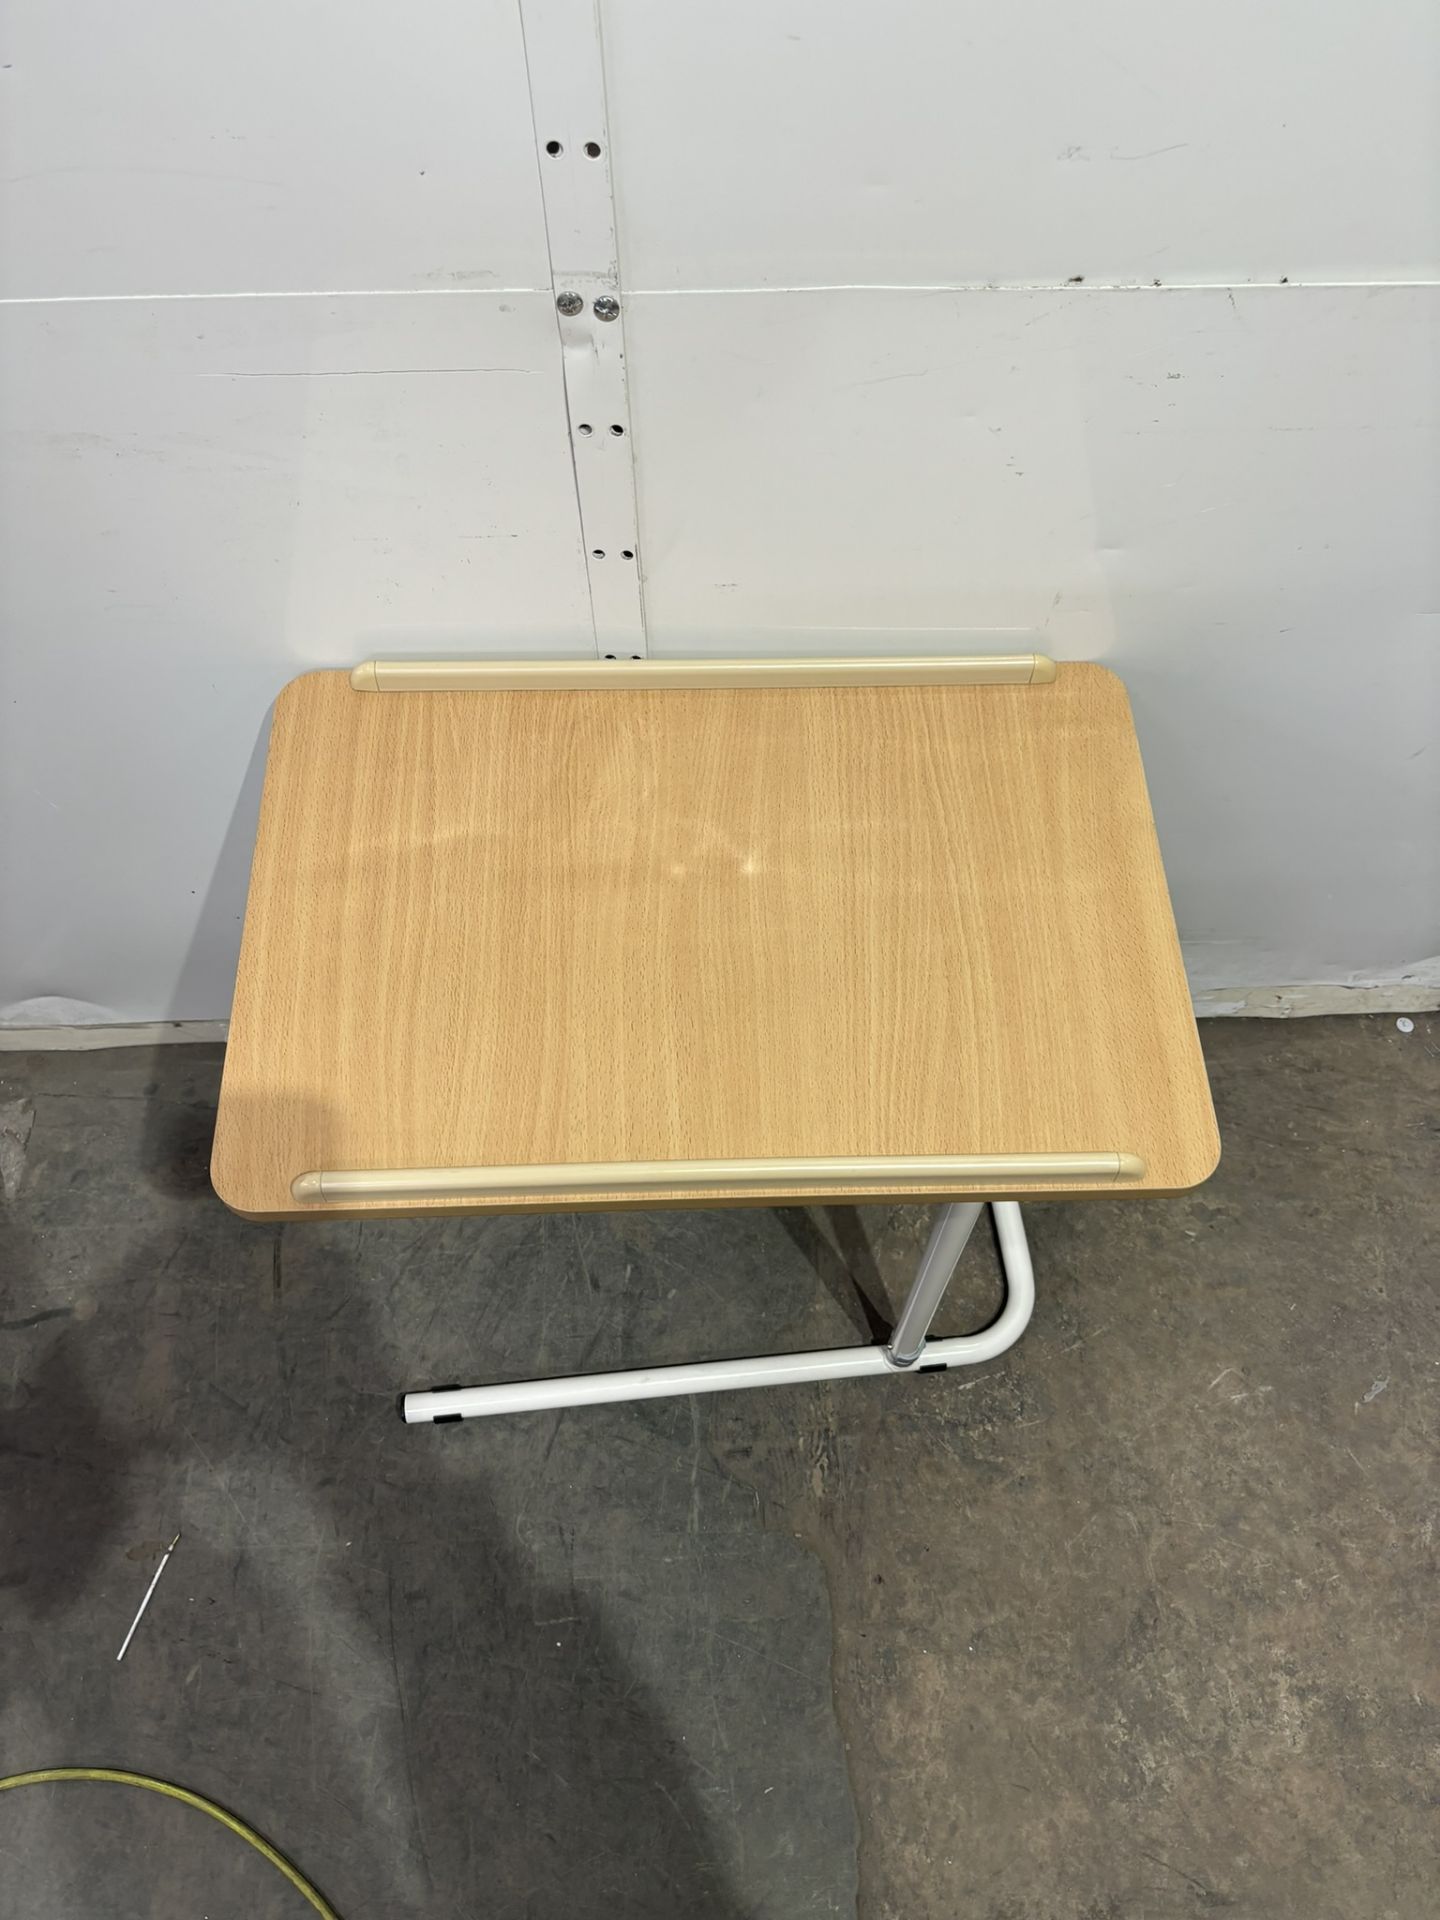 Adjustable Overbed Table - Image 2 of 5